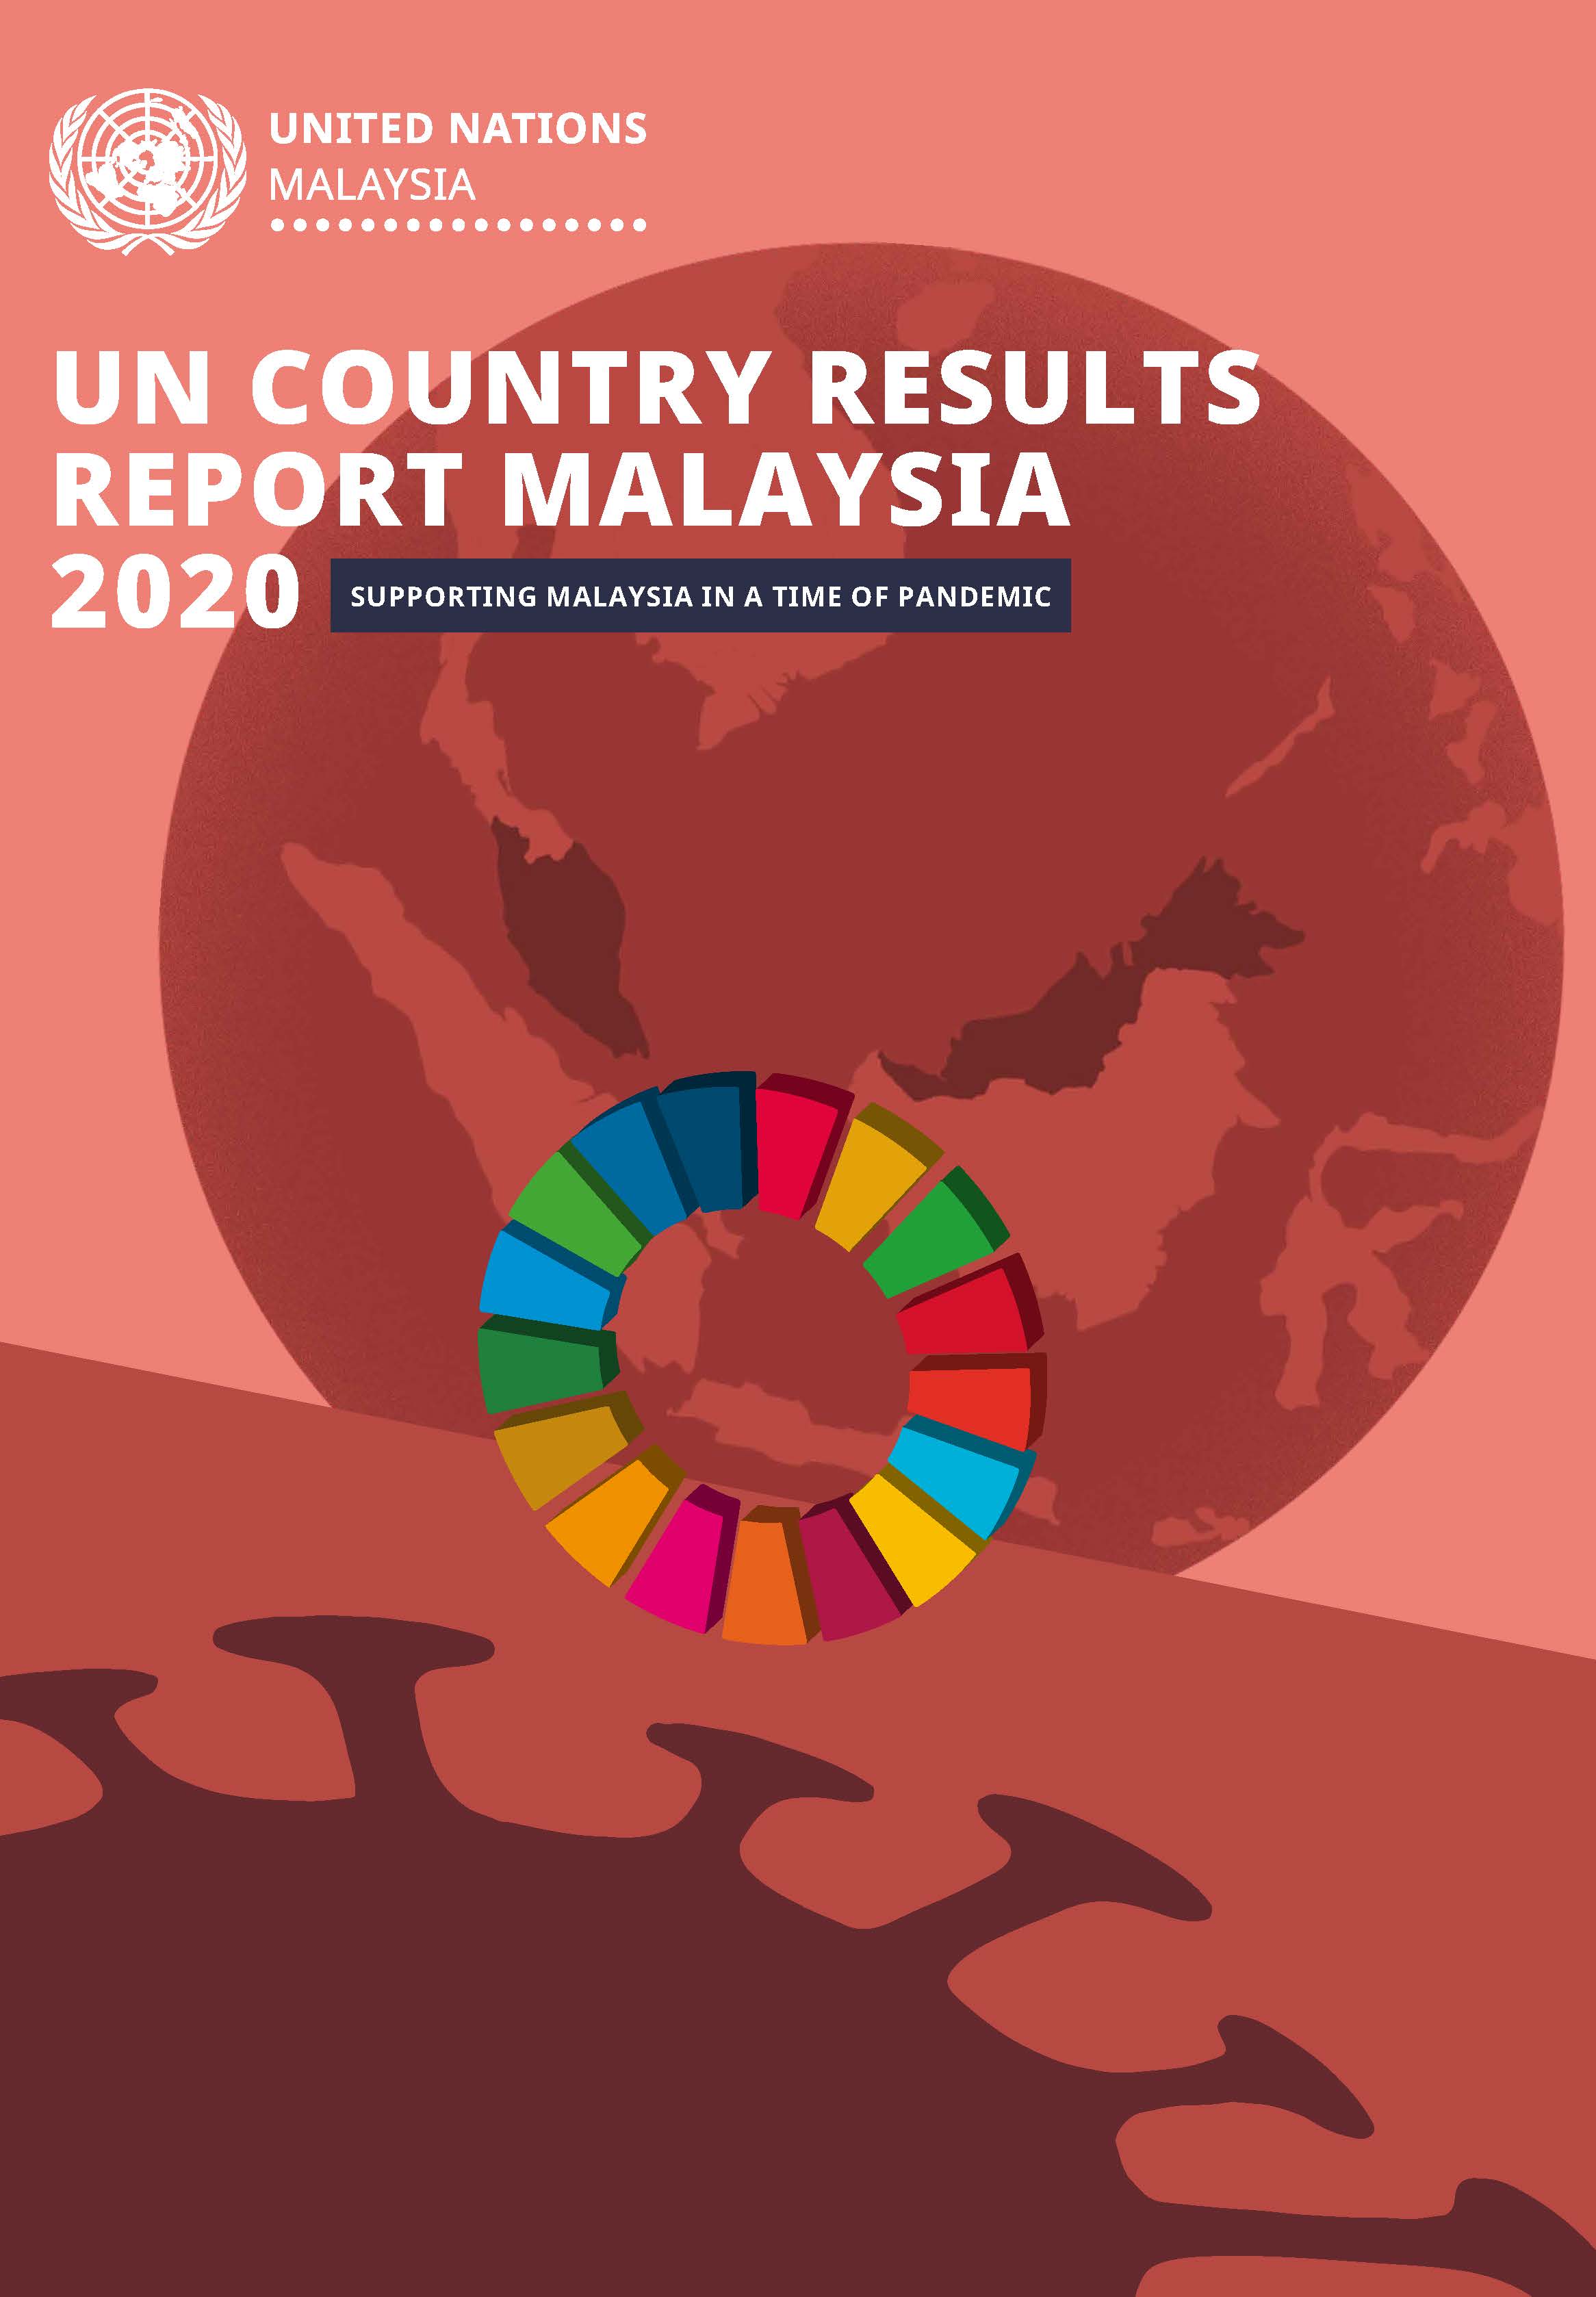 UN in Malaysia Country Results Report 2020